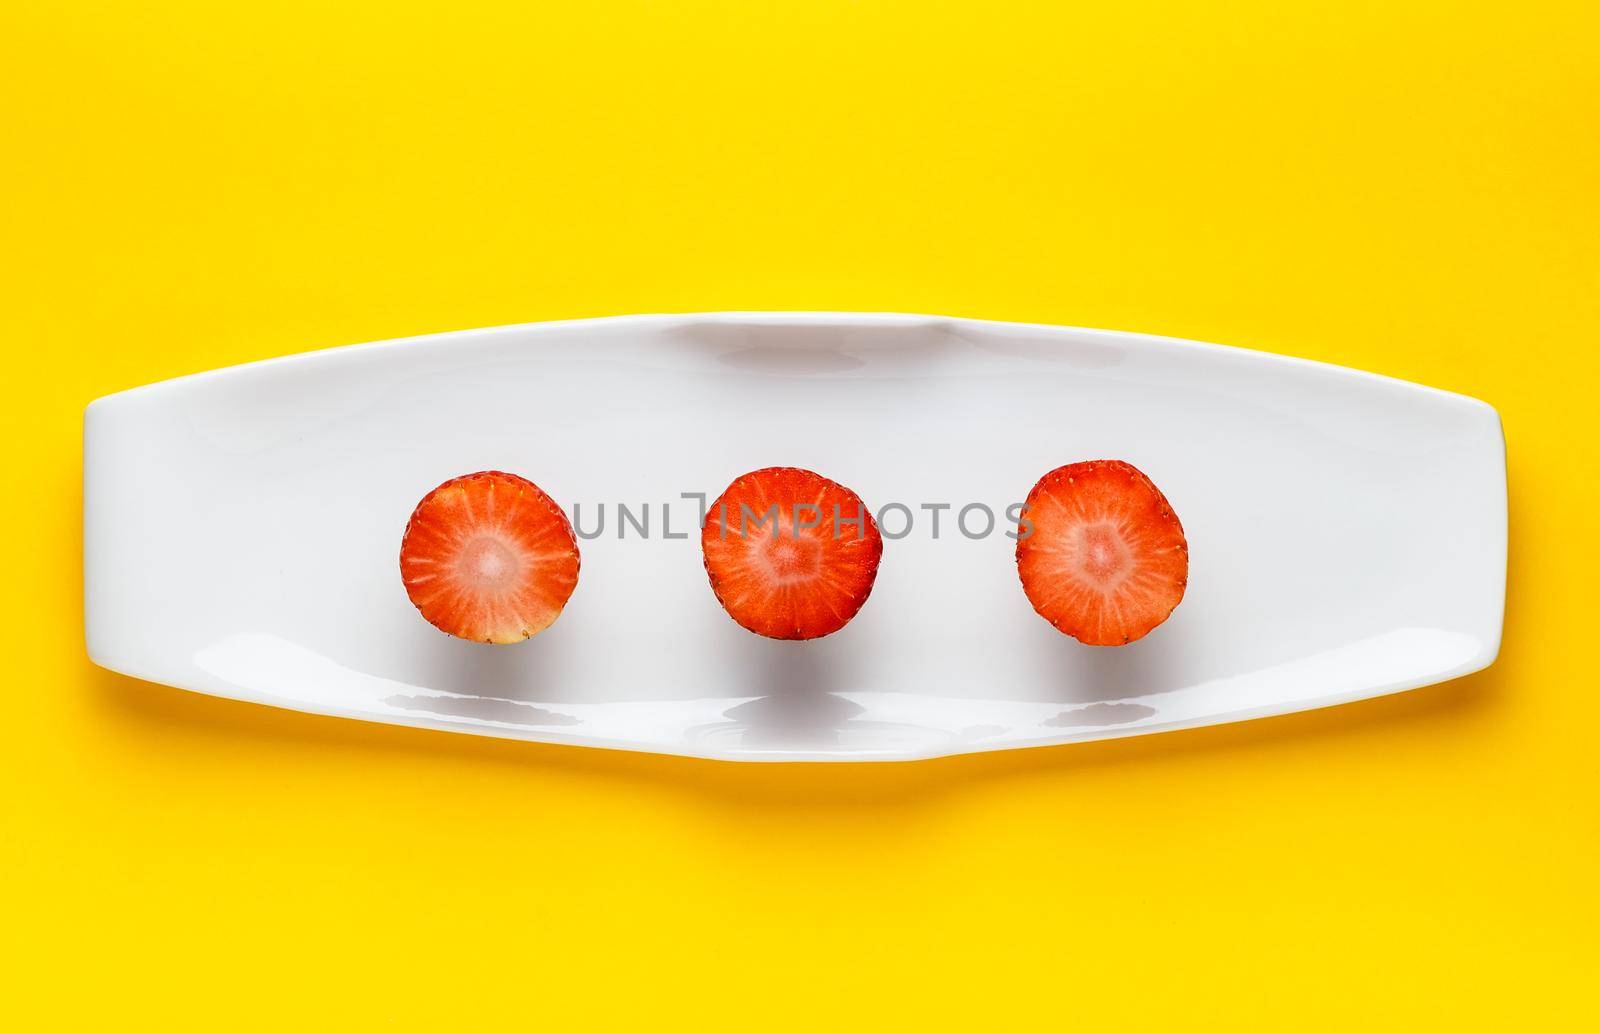 Three slices of fresh strawberry on a white elongated plate on yellow background. Horizontal image seen from above.